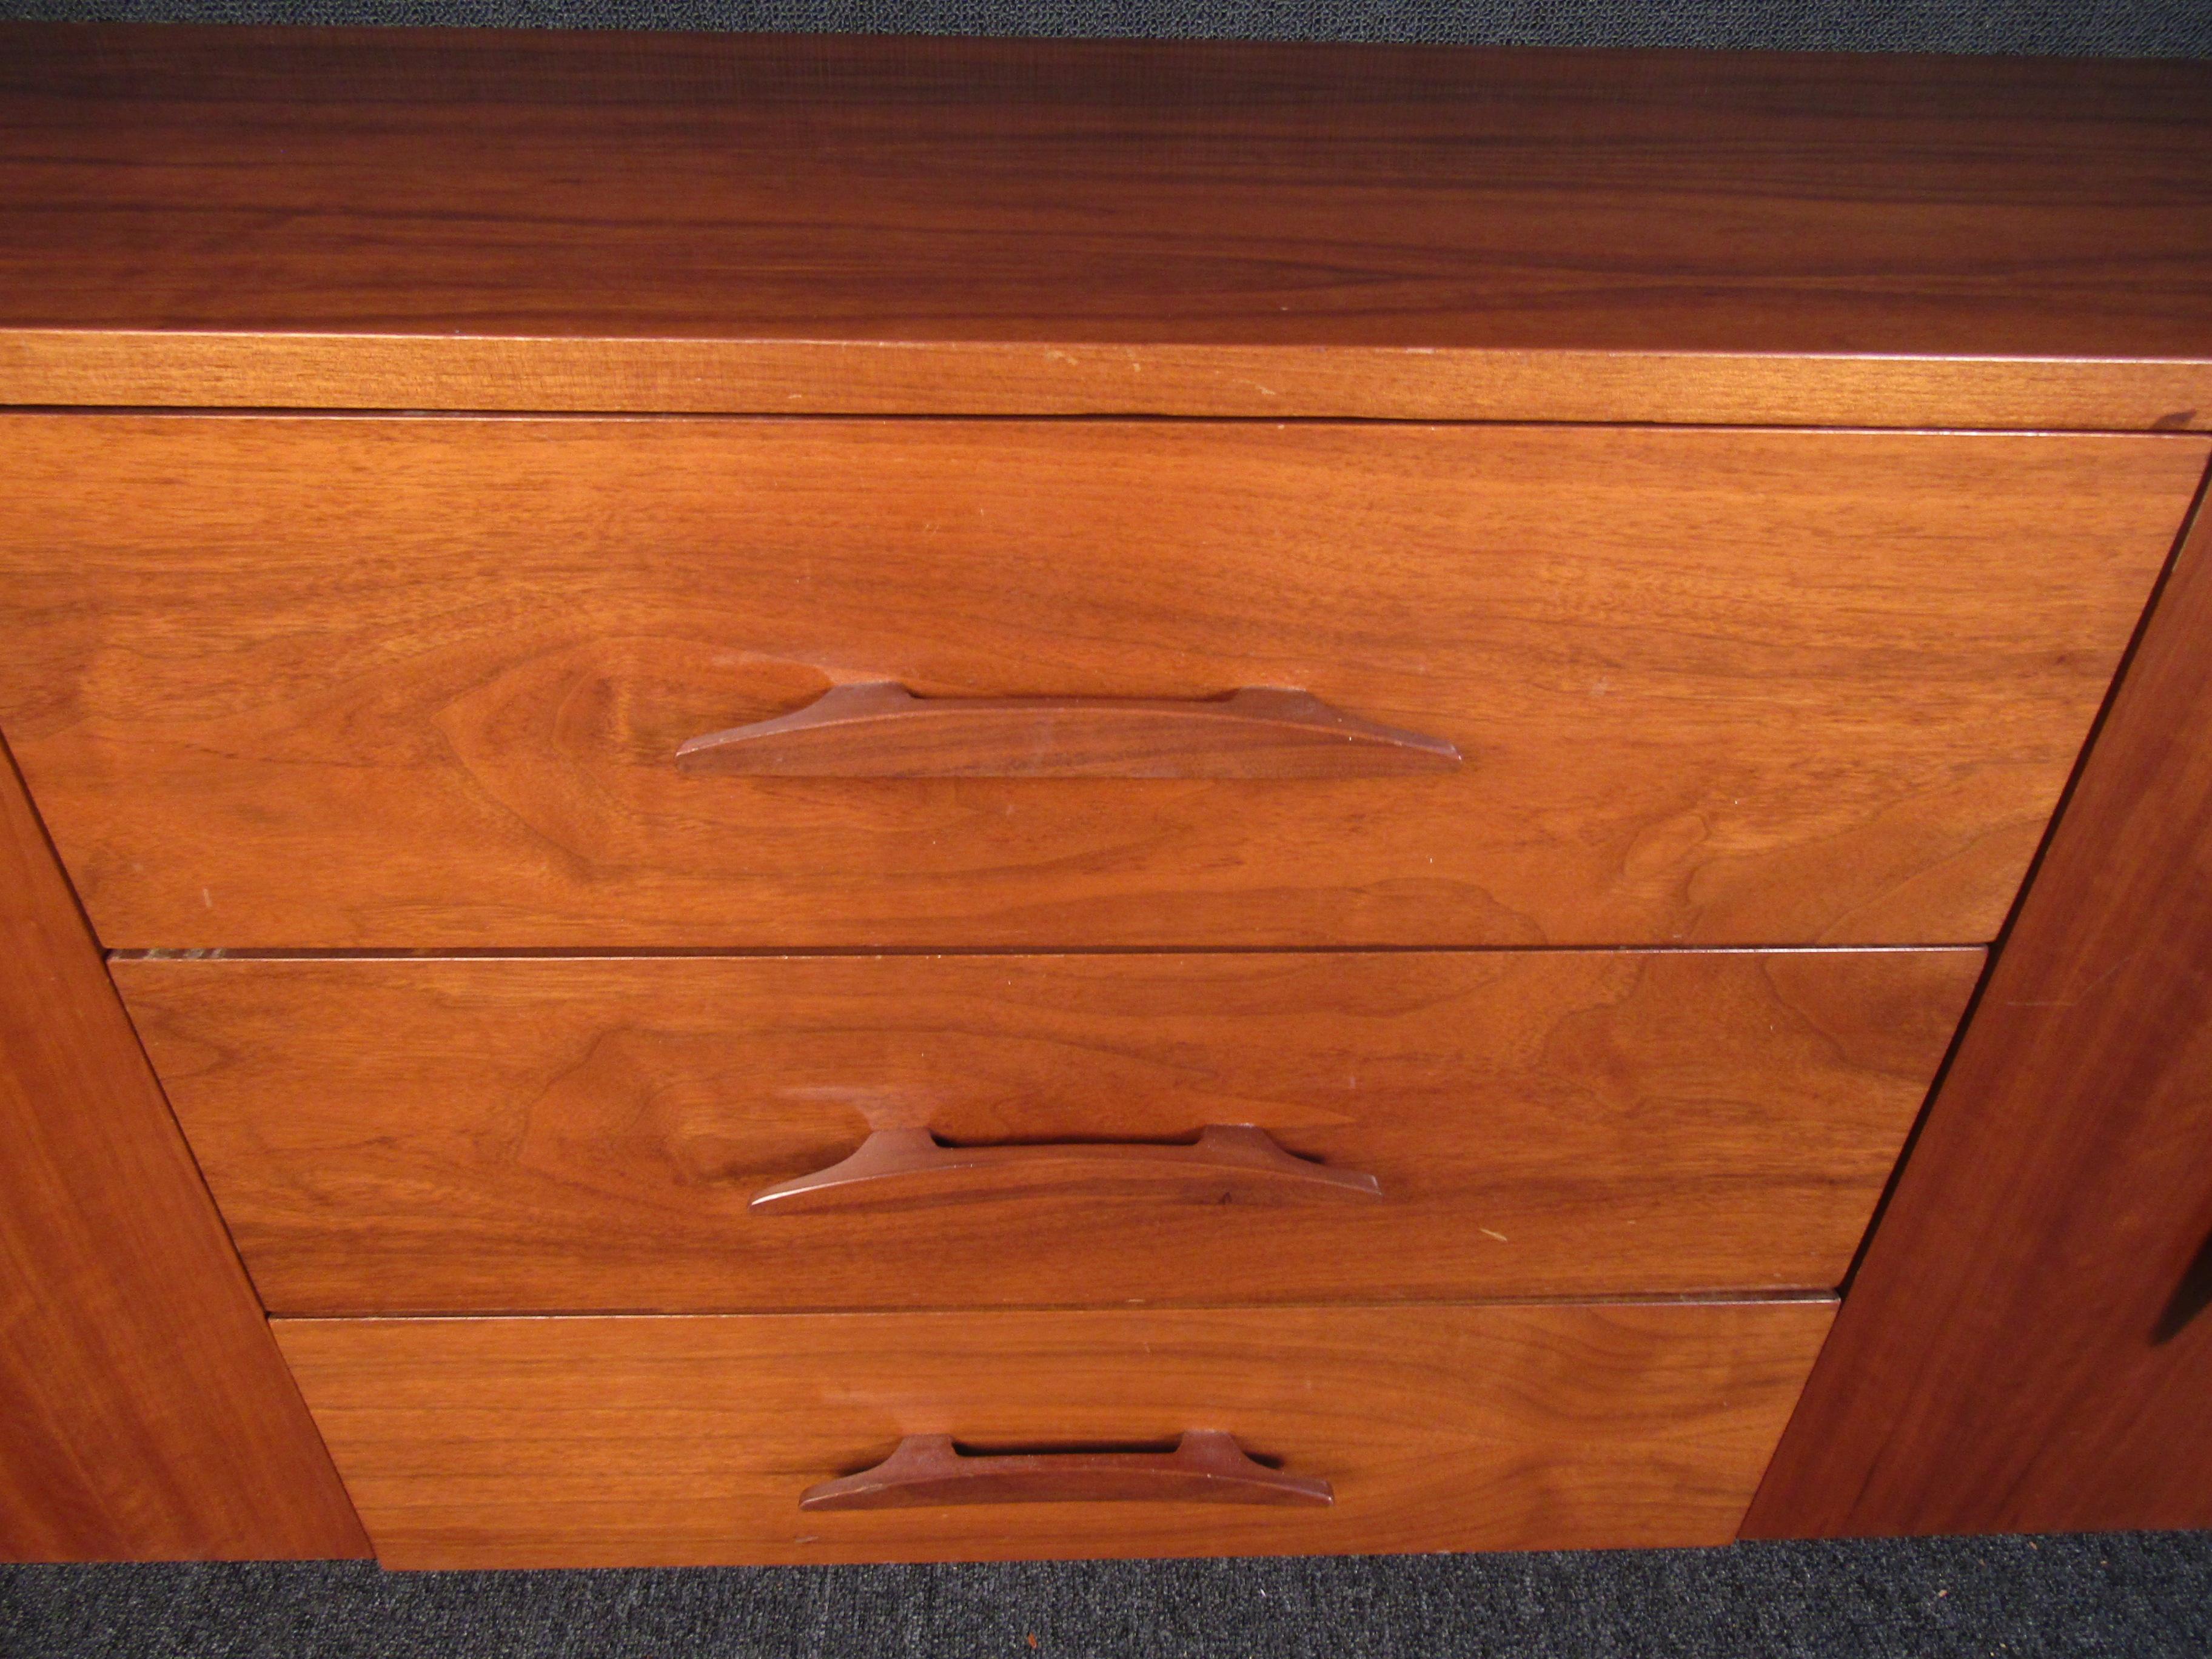 A Mid-Century Modern server that showcases a rich walnut woodgrain and nine spacious drawers. With a stylish design and quality that is built to last, this server will be a beautiful addition to any home for years to come. Please confirm item